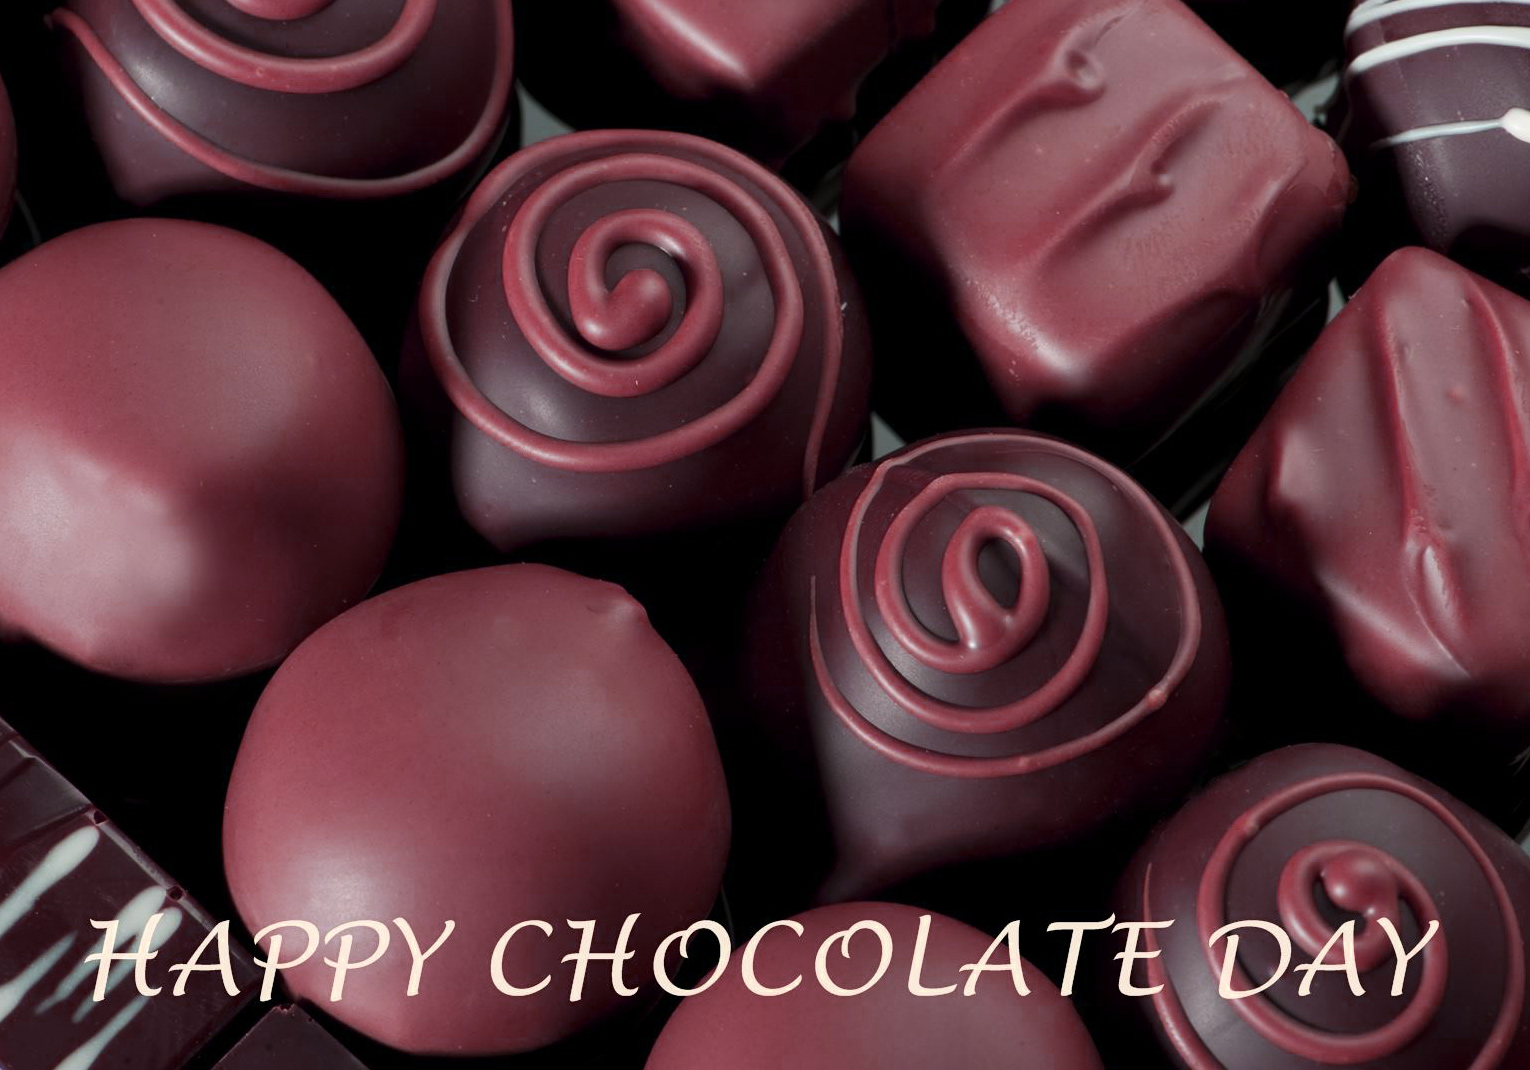 Happy Chocolate Day Images Photo Wallpaper Pictures - Chocolate Day Images Download Hd , HD Wallpaper & Backgrounds